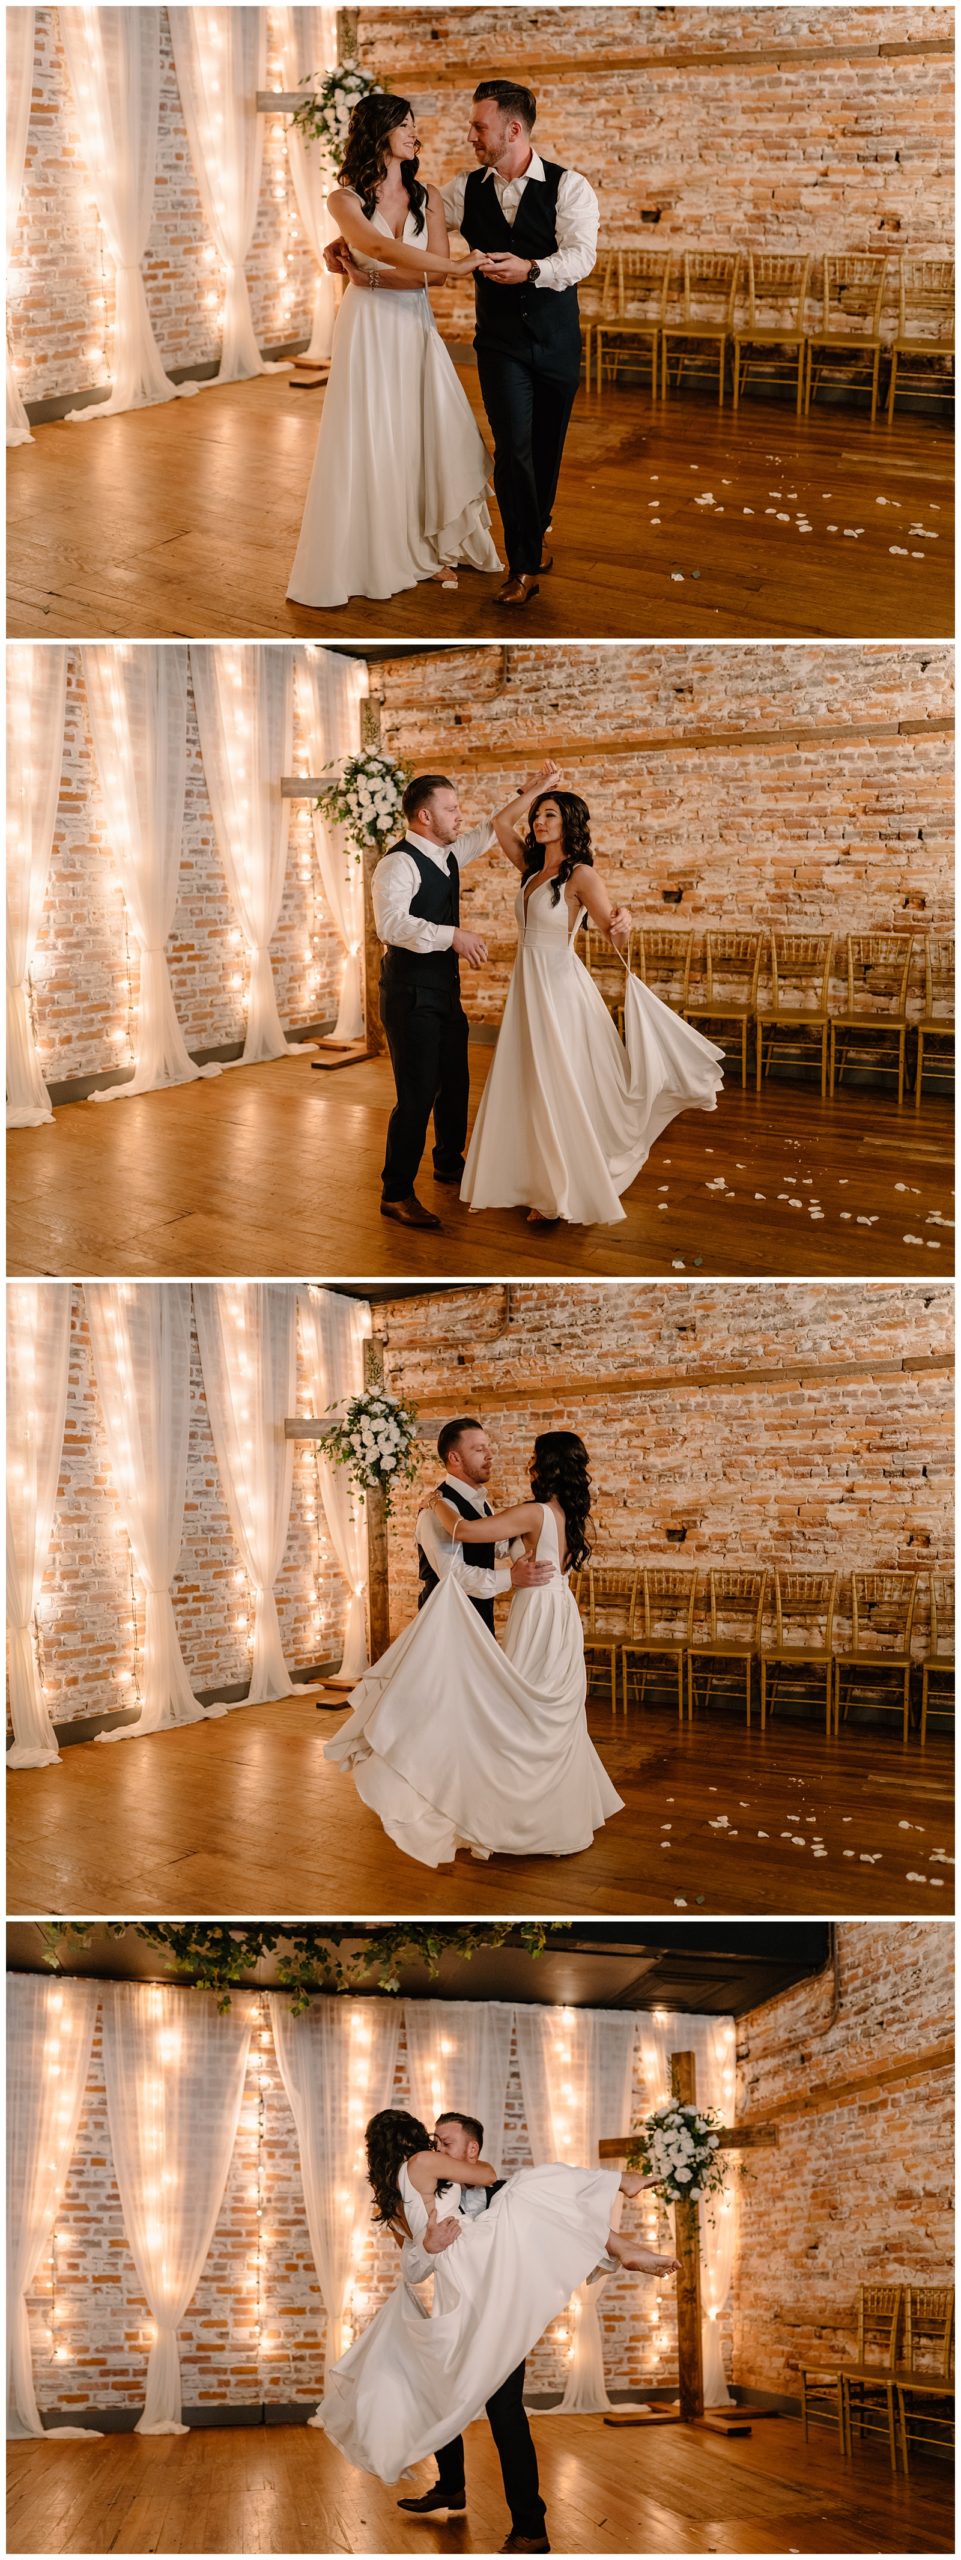 Romantic choreographed first dance at Bakery 1818